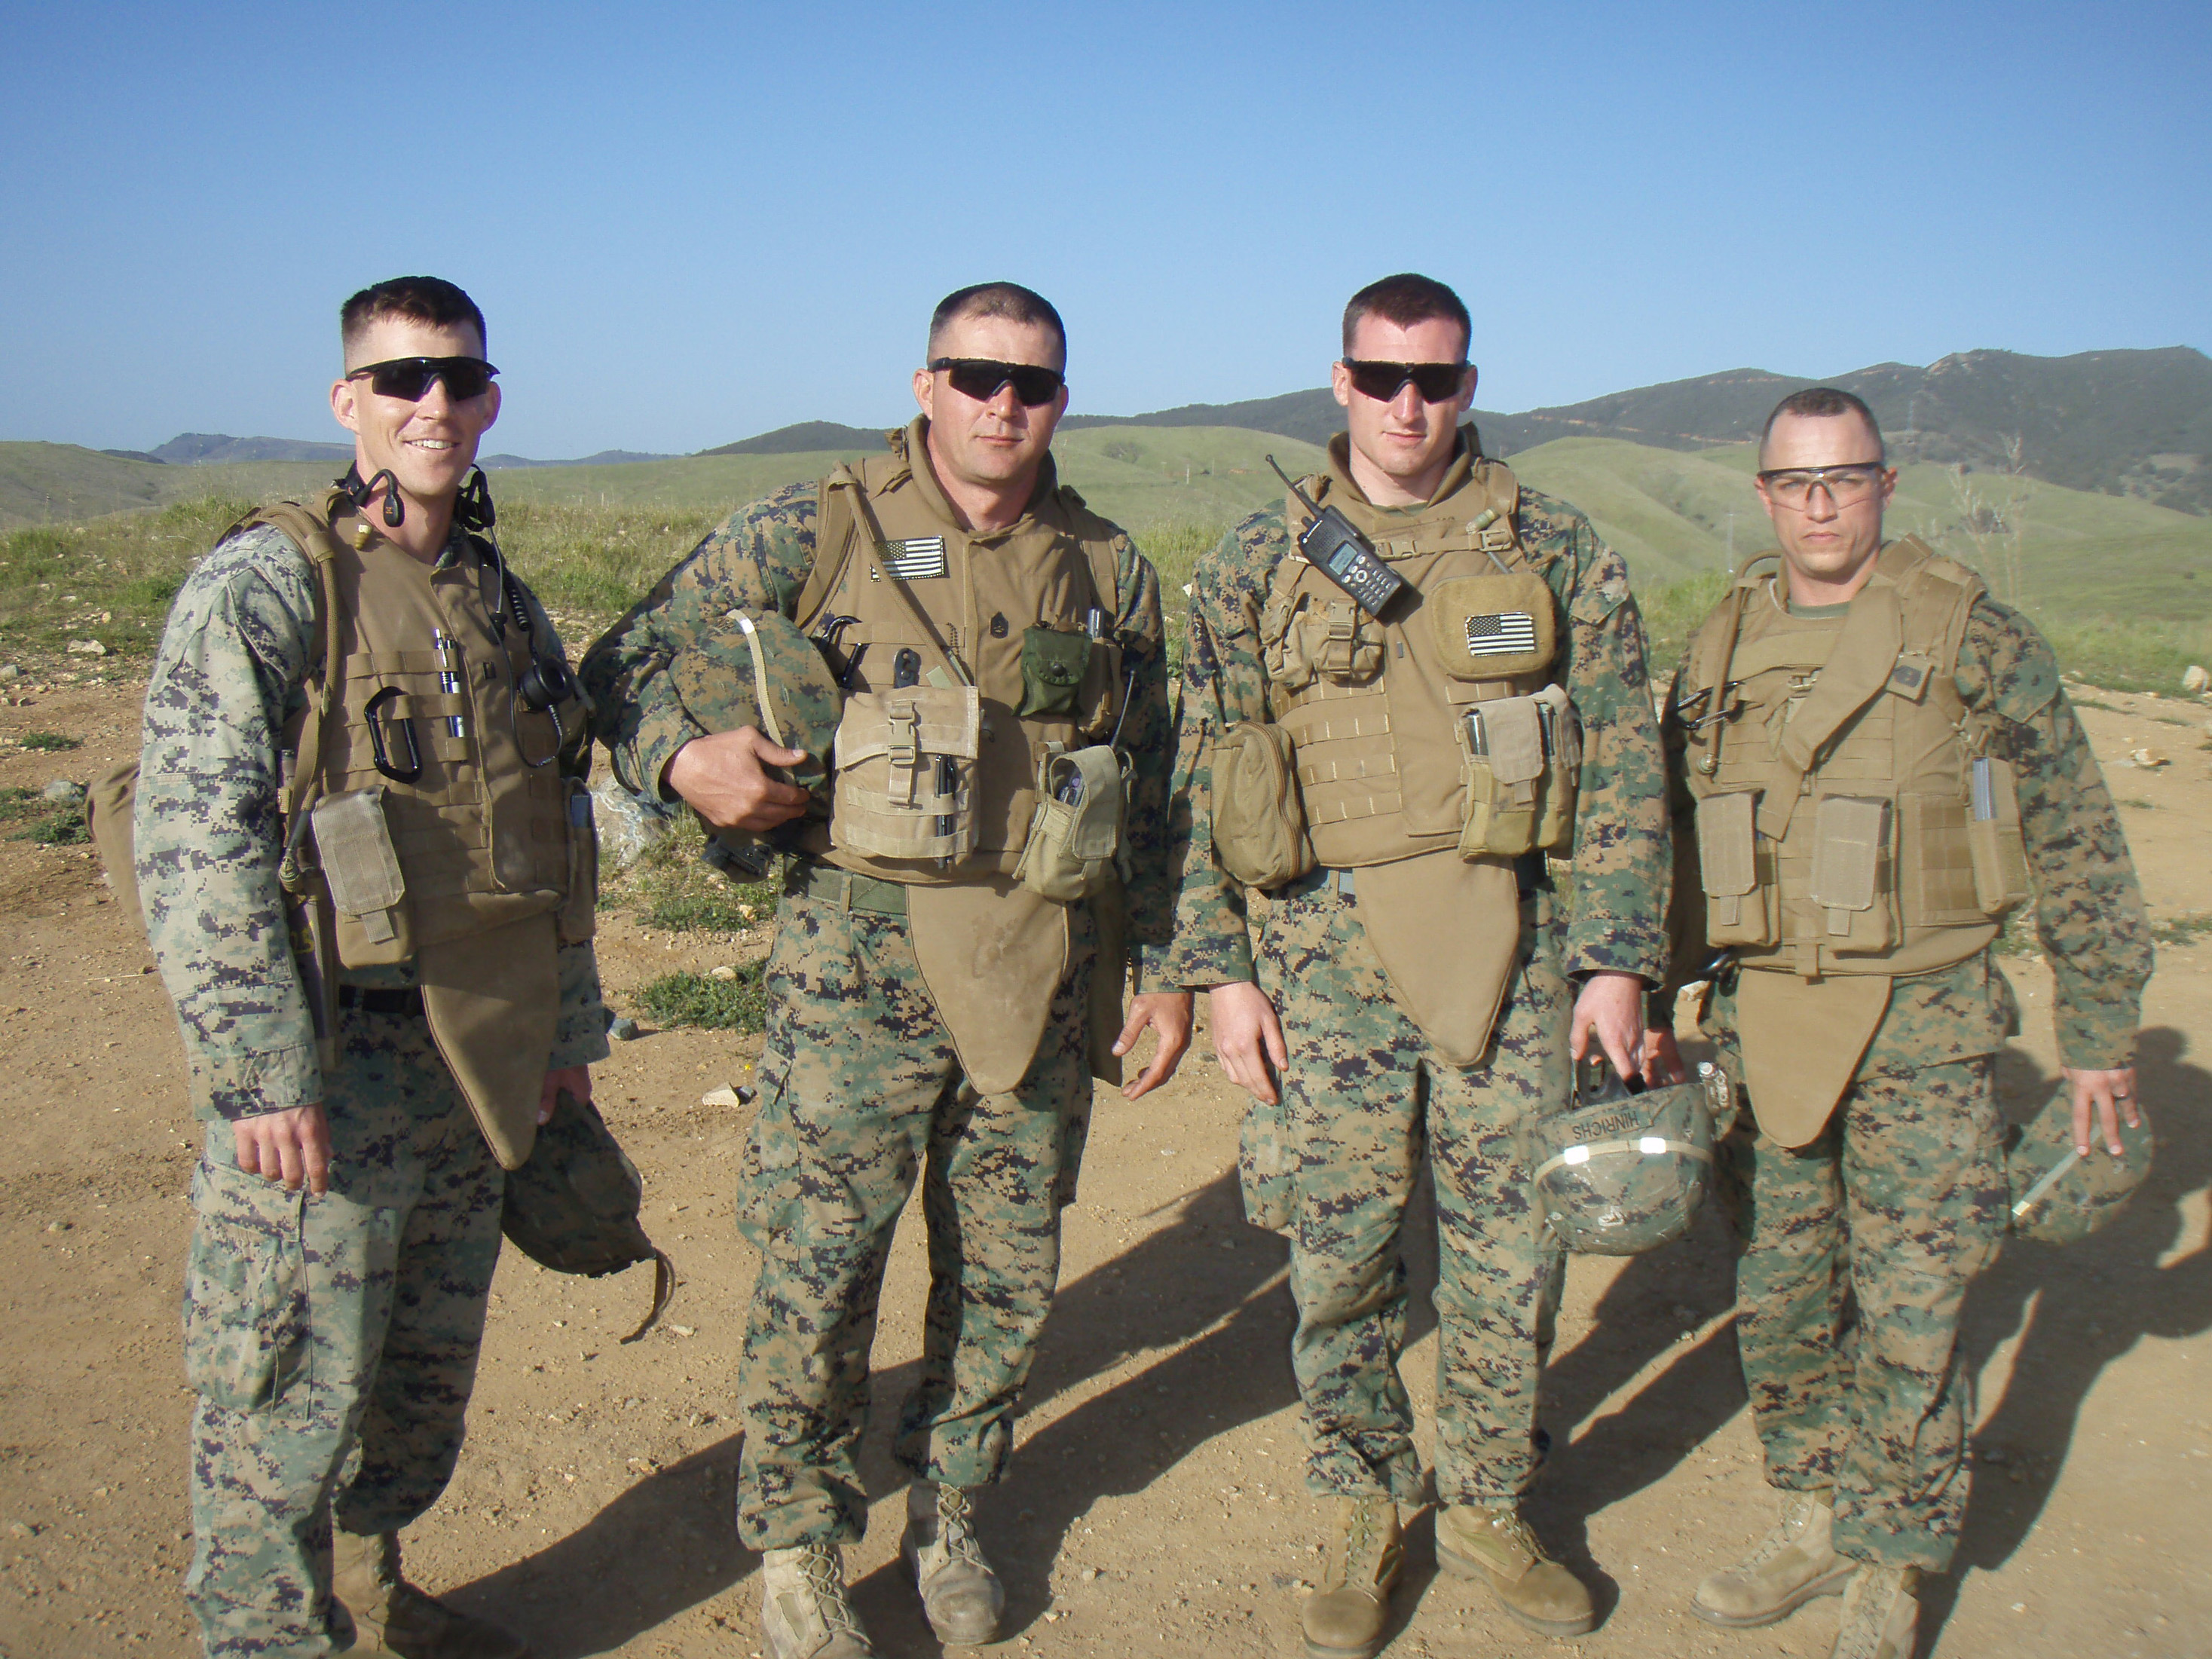 On the far left Capt. George Flynn, U.S. Marine Corps, Virginia Tech Corps of Cadets Class of 2001 standing with fellow Marines in Afghanistan